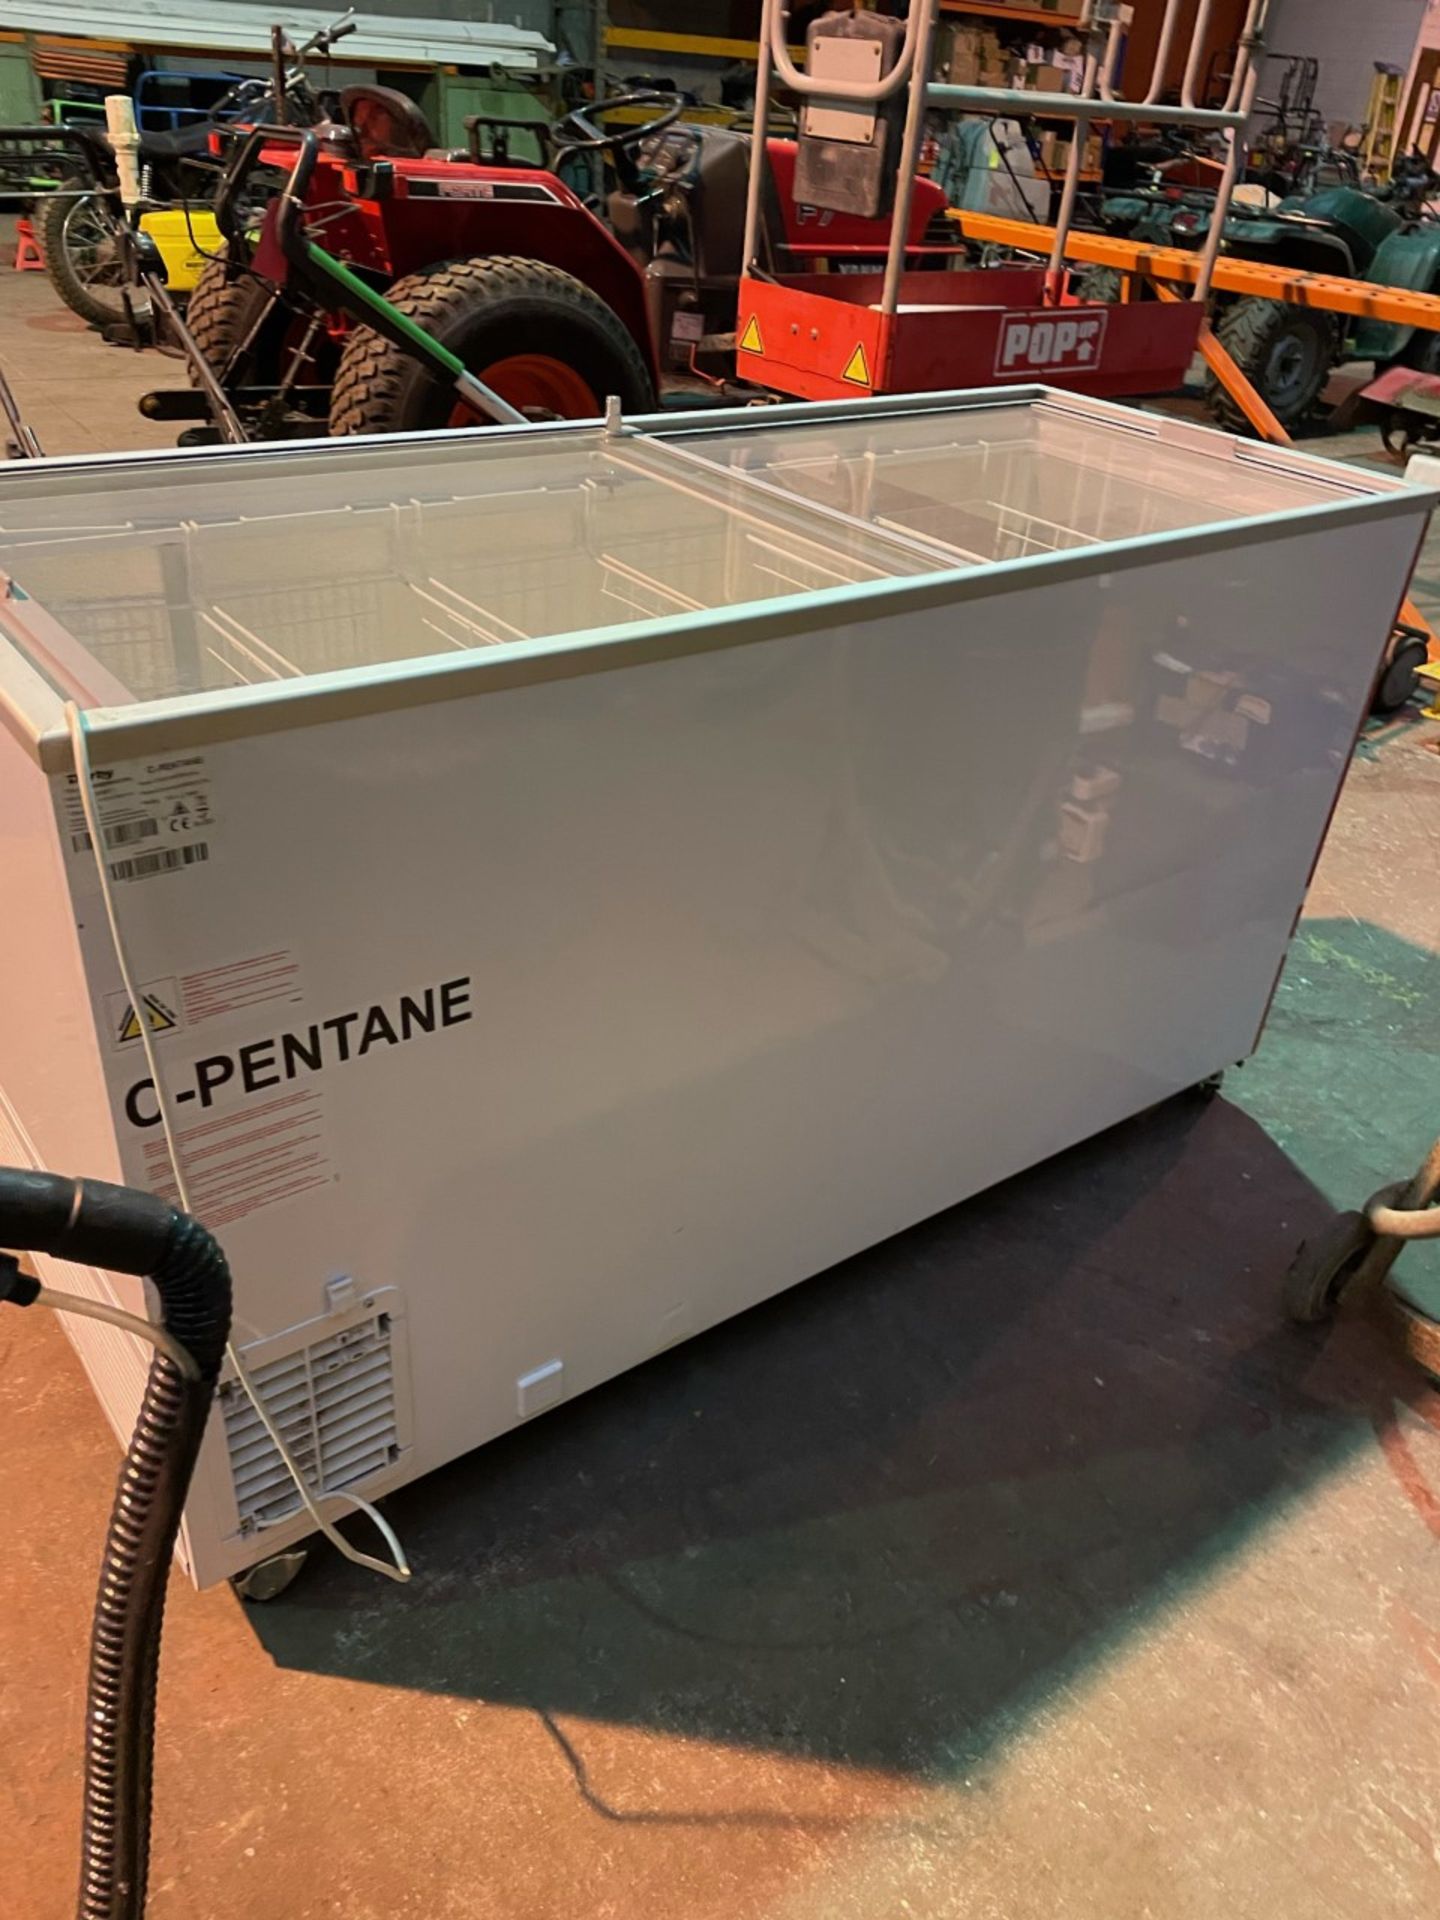 C pentane commercial iced goods freezer.Very clean, baskets inside, sliding glass top. Dims 155 x 64 - Image 4 of 4